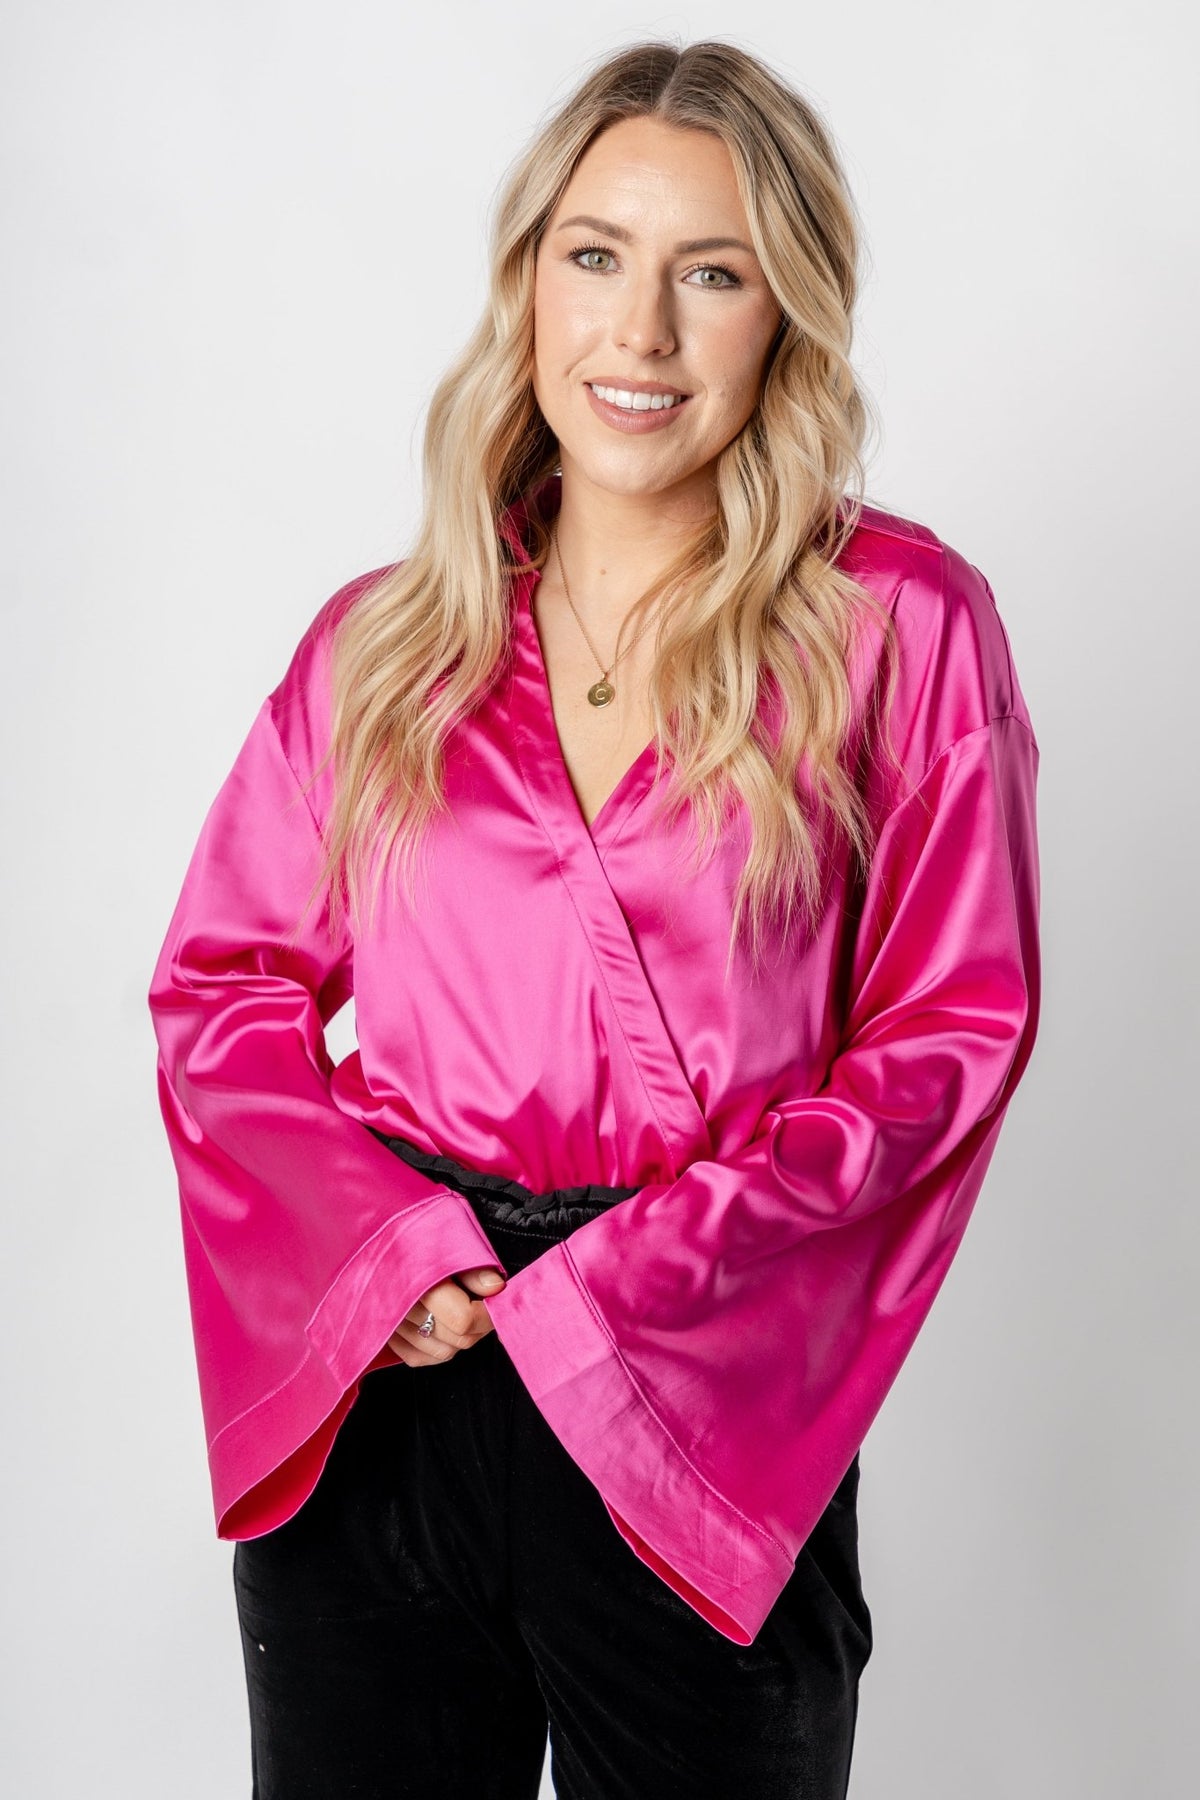 Satin shirt bodysuit magenta - Trendy New Year's Eve Outfits at Lush Fashion Lounge Boutique in Oklahoma City